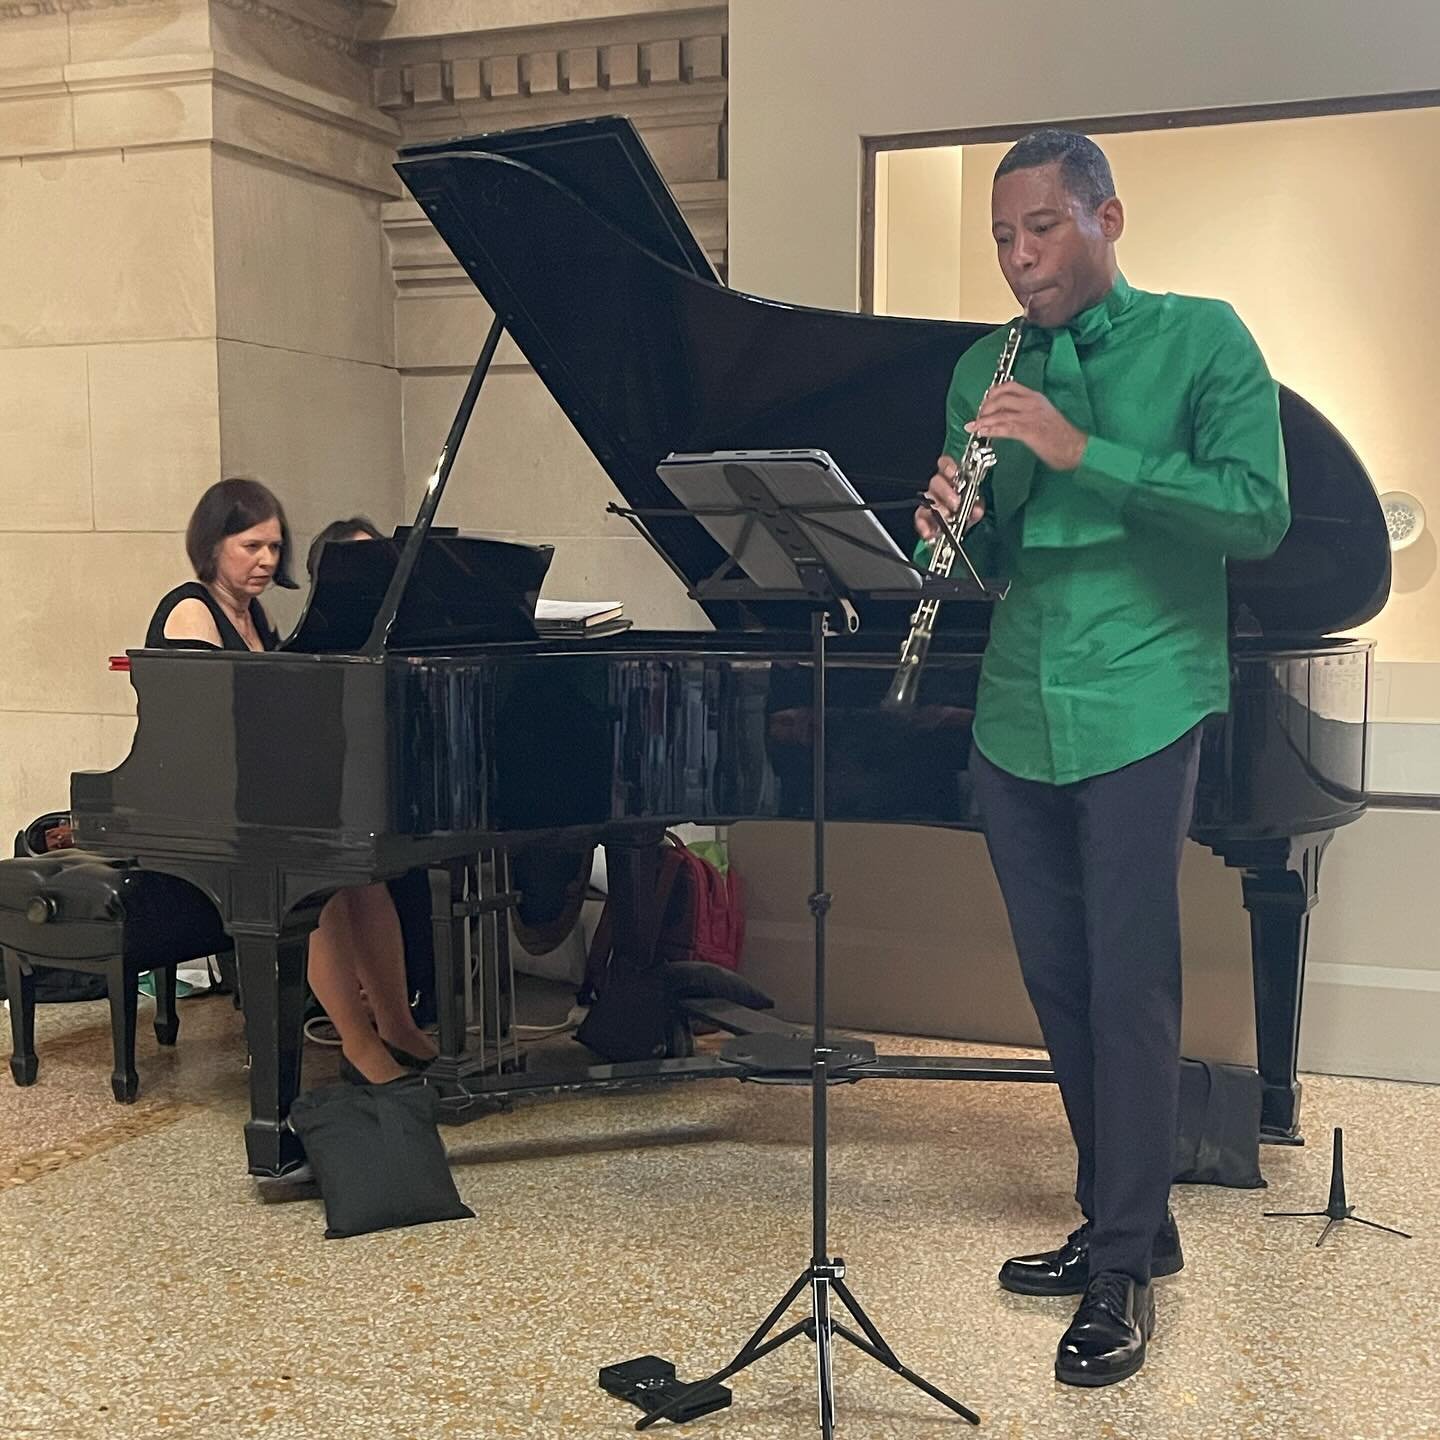 Saturday evening The Met Museum&rsquo;s ETHEL series, oboist Hassan Anderson and pianist Lydia Brown performing.

@metmuseum @metmusicalinstruments @metlivearts @hassanandersonmusic @lydiatheencyclopidia #harlemrenaissance #blackcomposers #classicalm